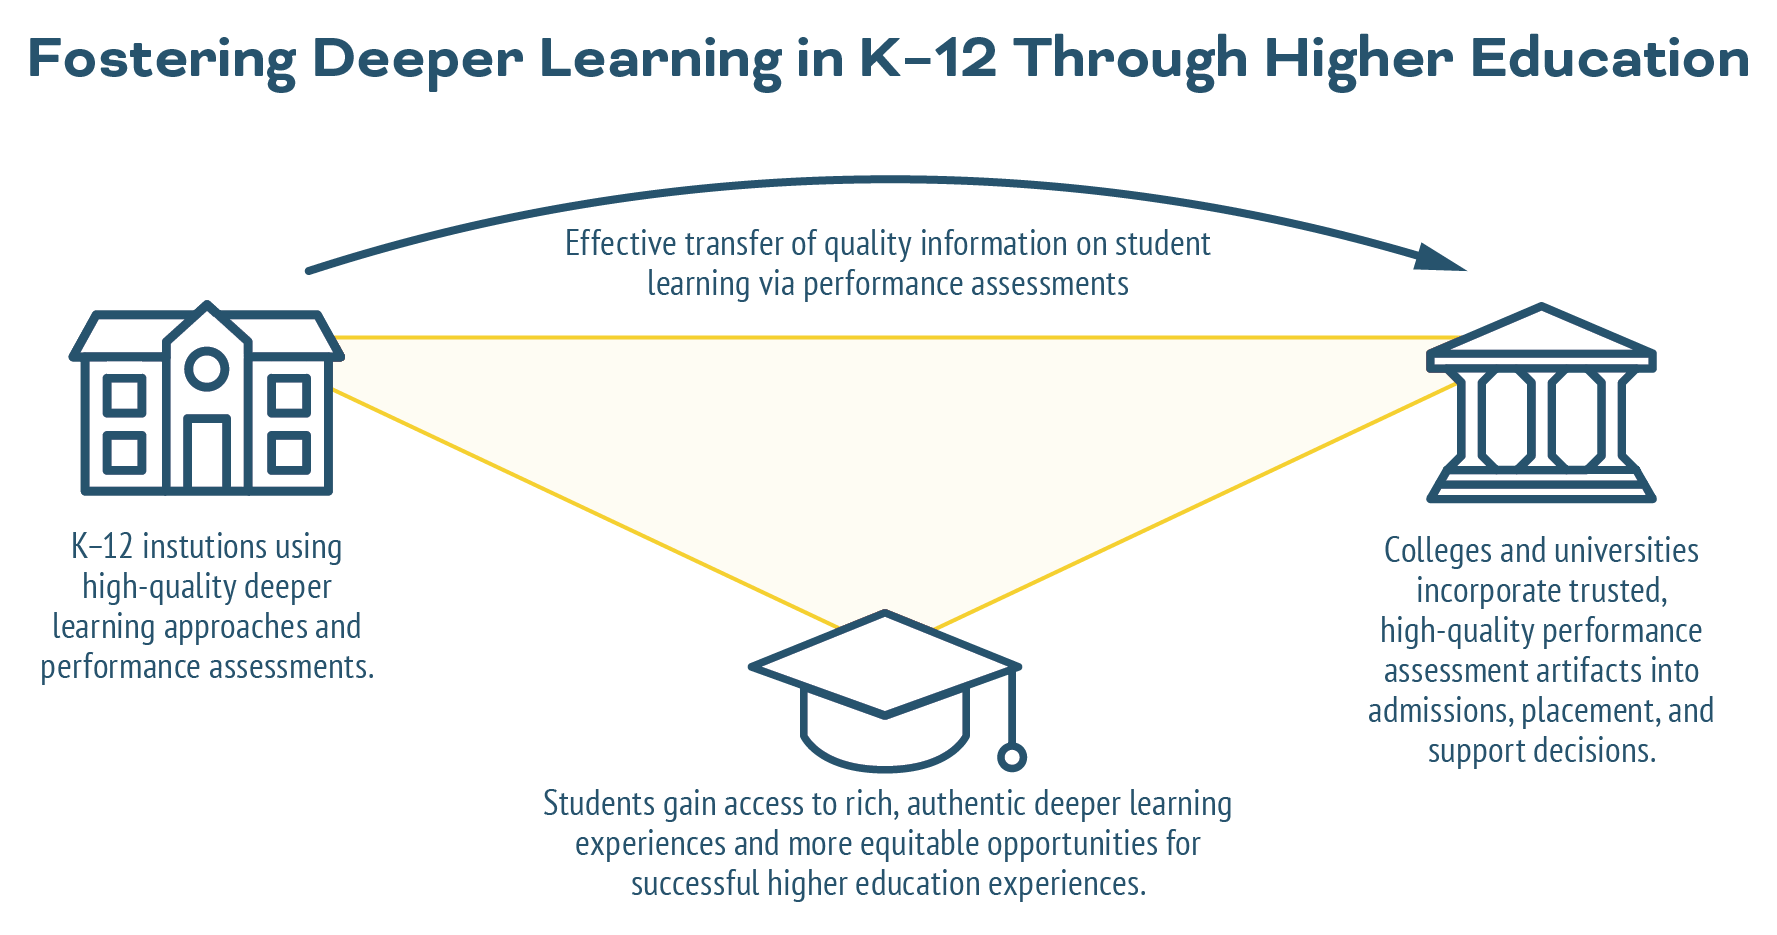 Fostering Deeper Learning in K-12 Through Higher Education